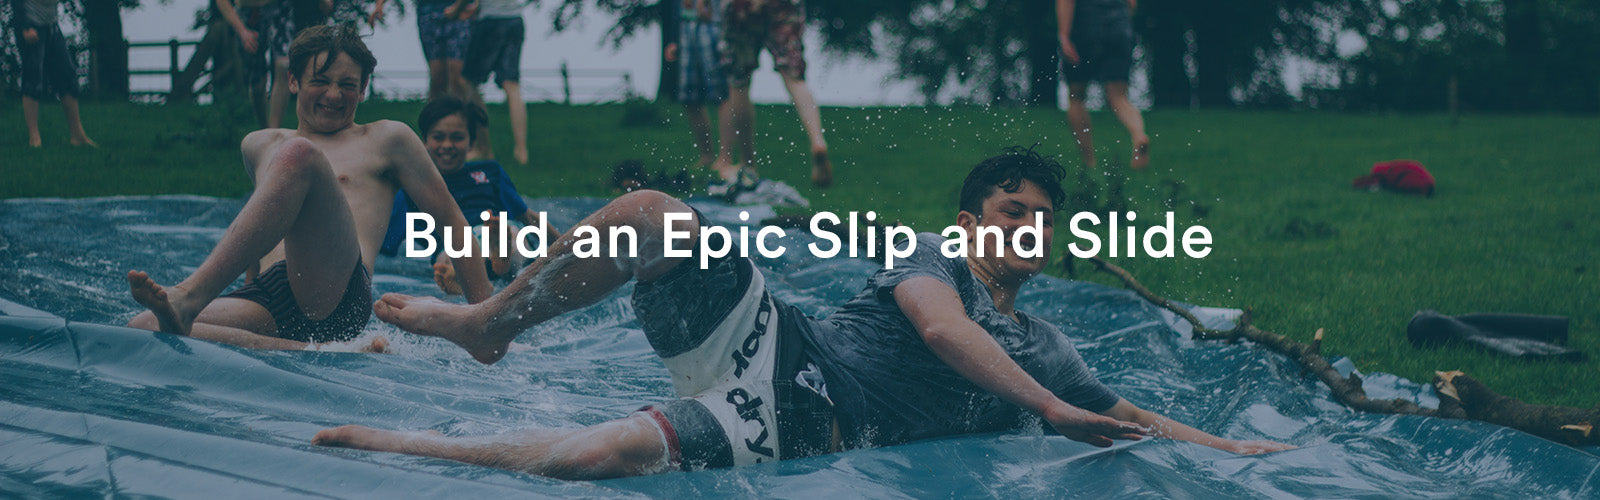 Build an Epic Slip and Slide